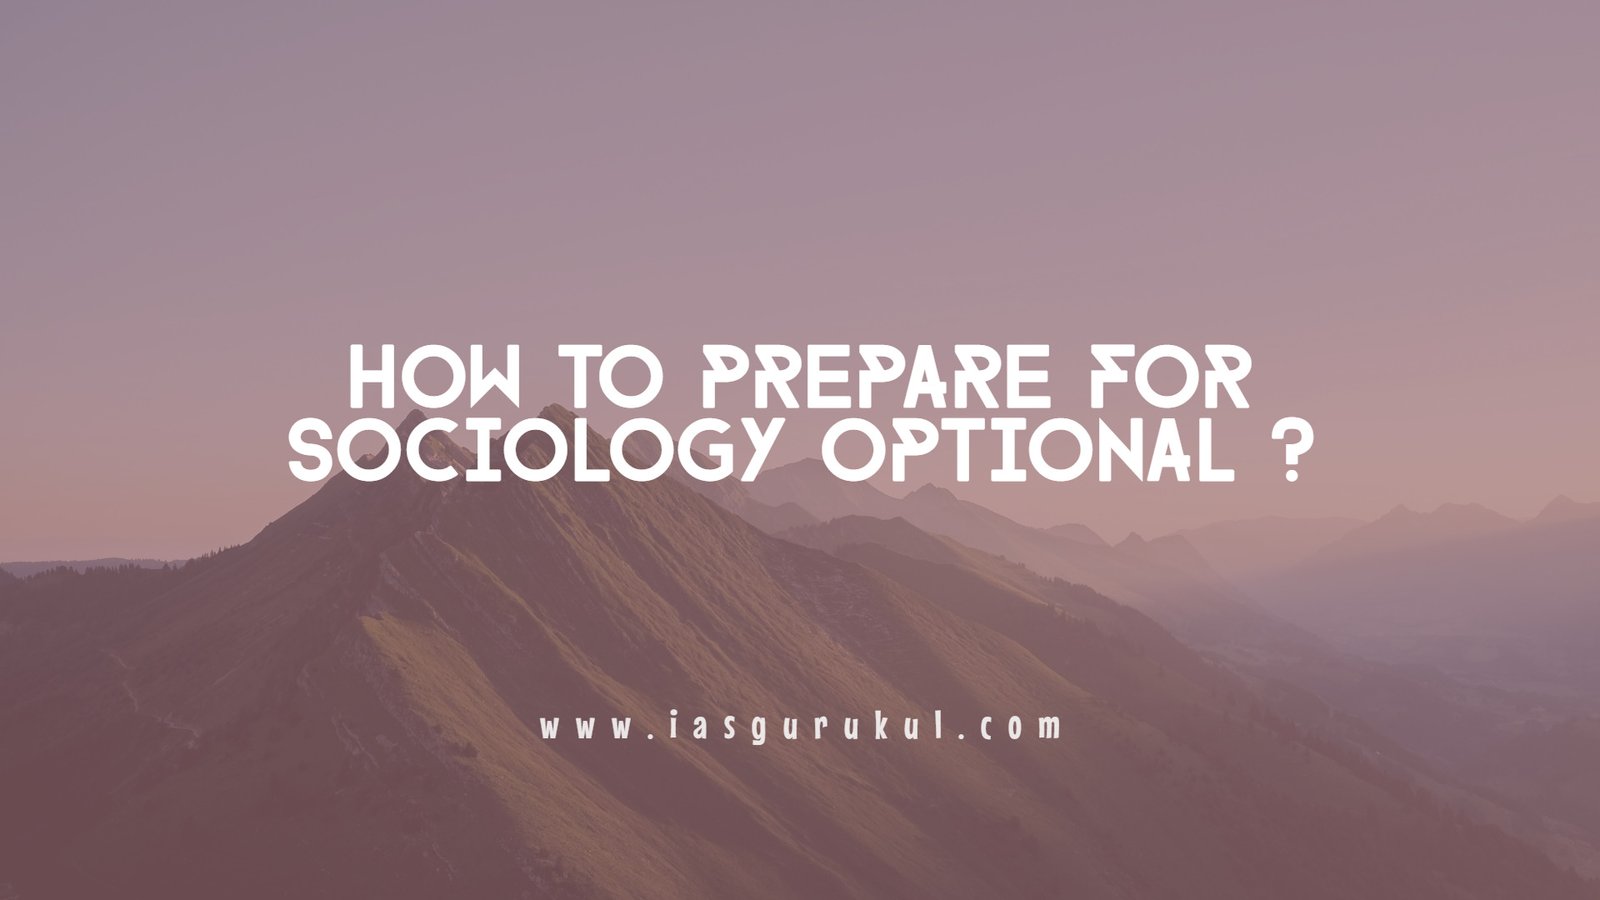 Strategy To Prepare For Sociology Optional